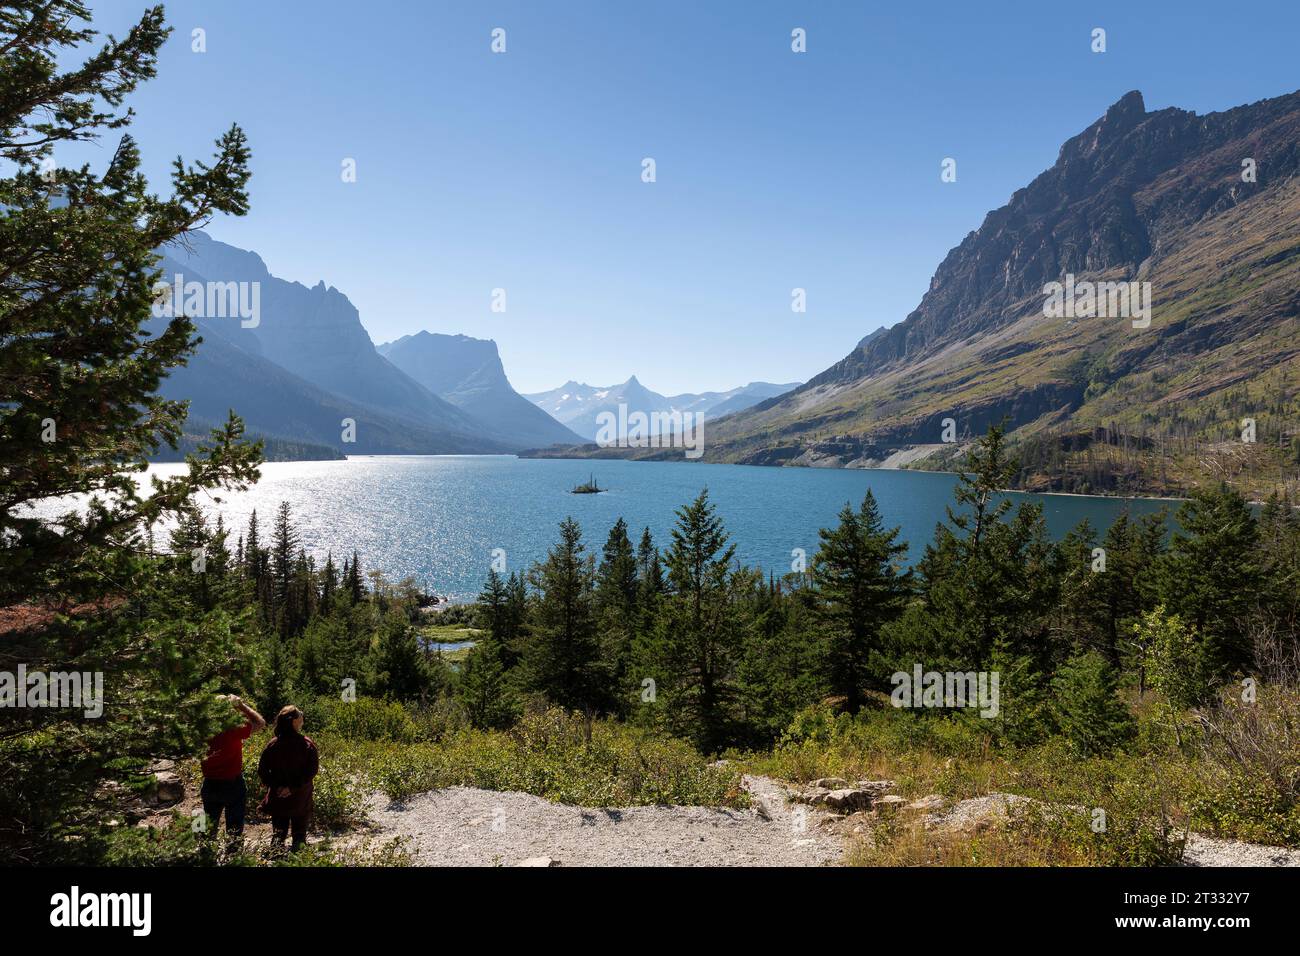 View of Saint Mary Lake from the Wild Goose Island Overlook in Glacier National Park, Montana. Stock Photo